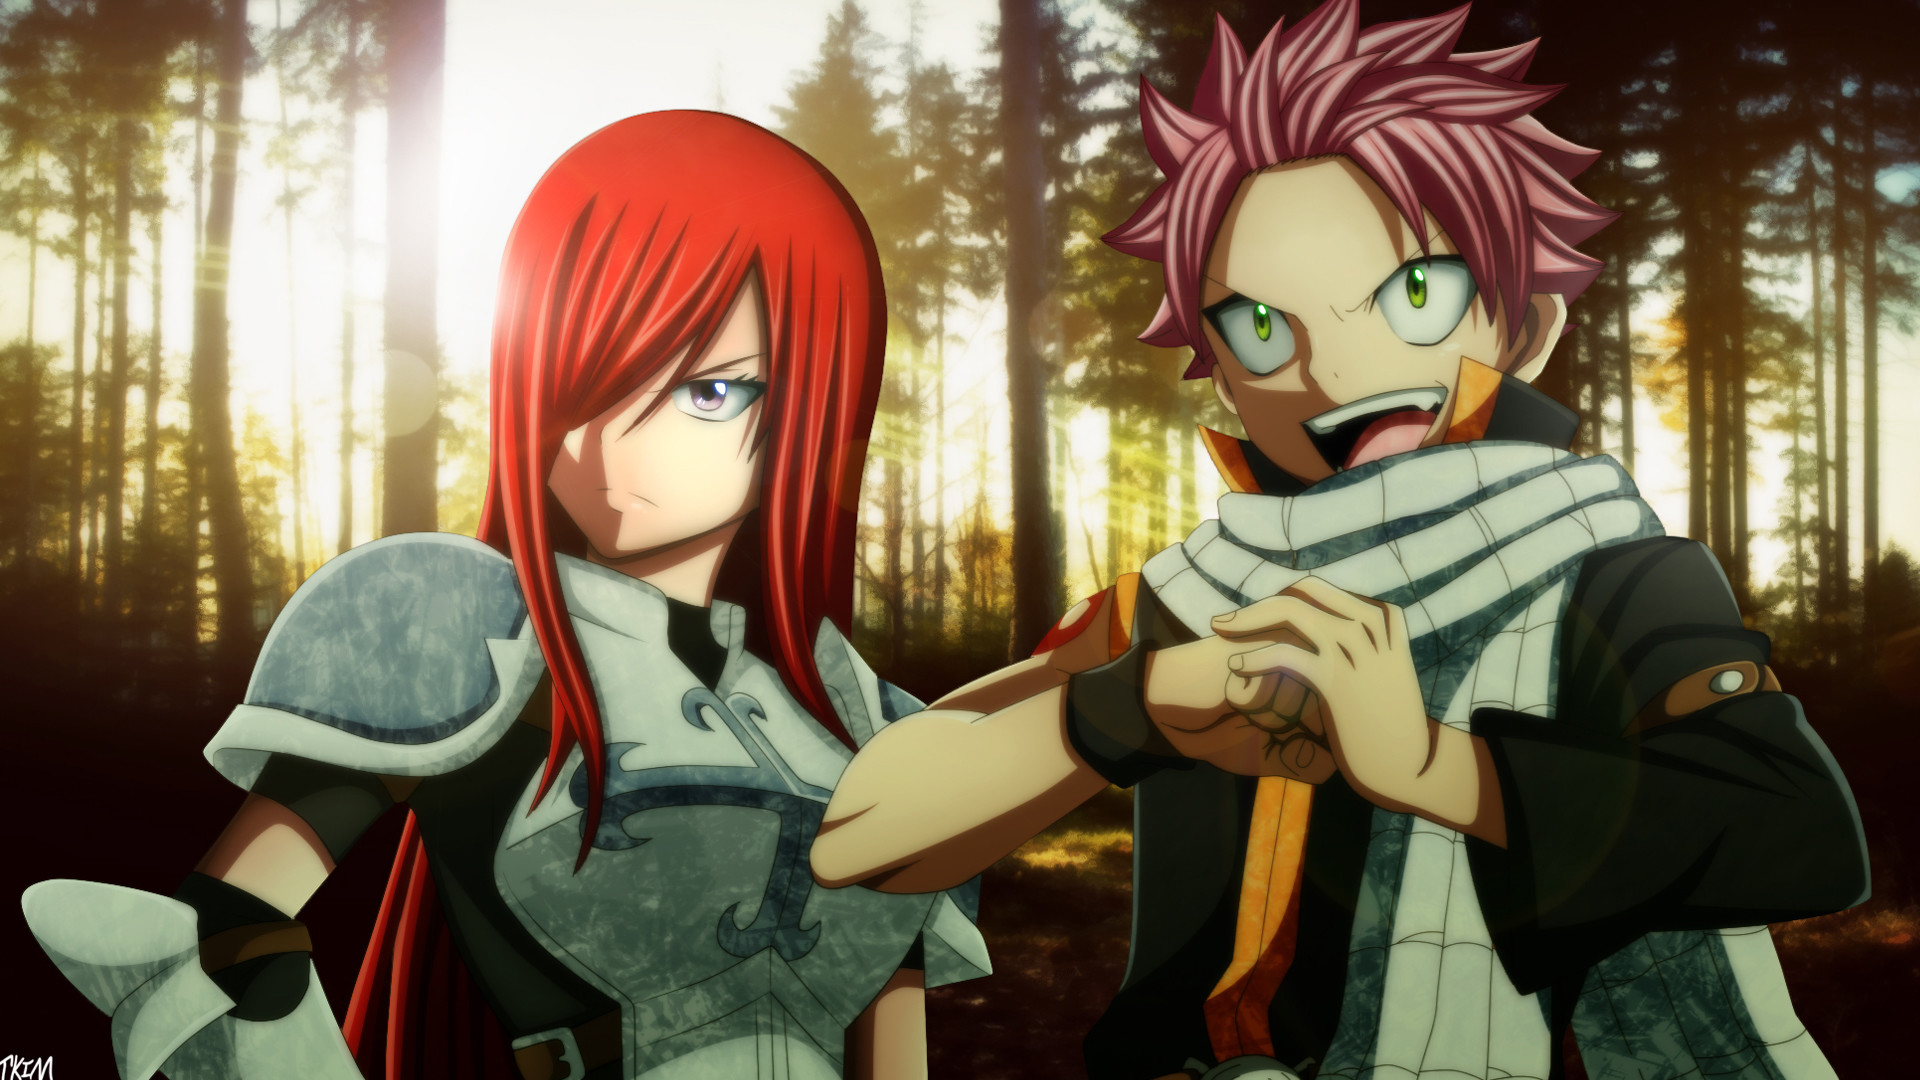 1920x1080 natsu dragneel and erza scarlet fairy tail anime